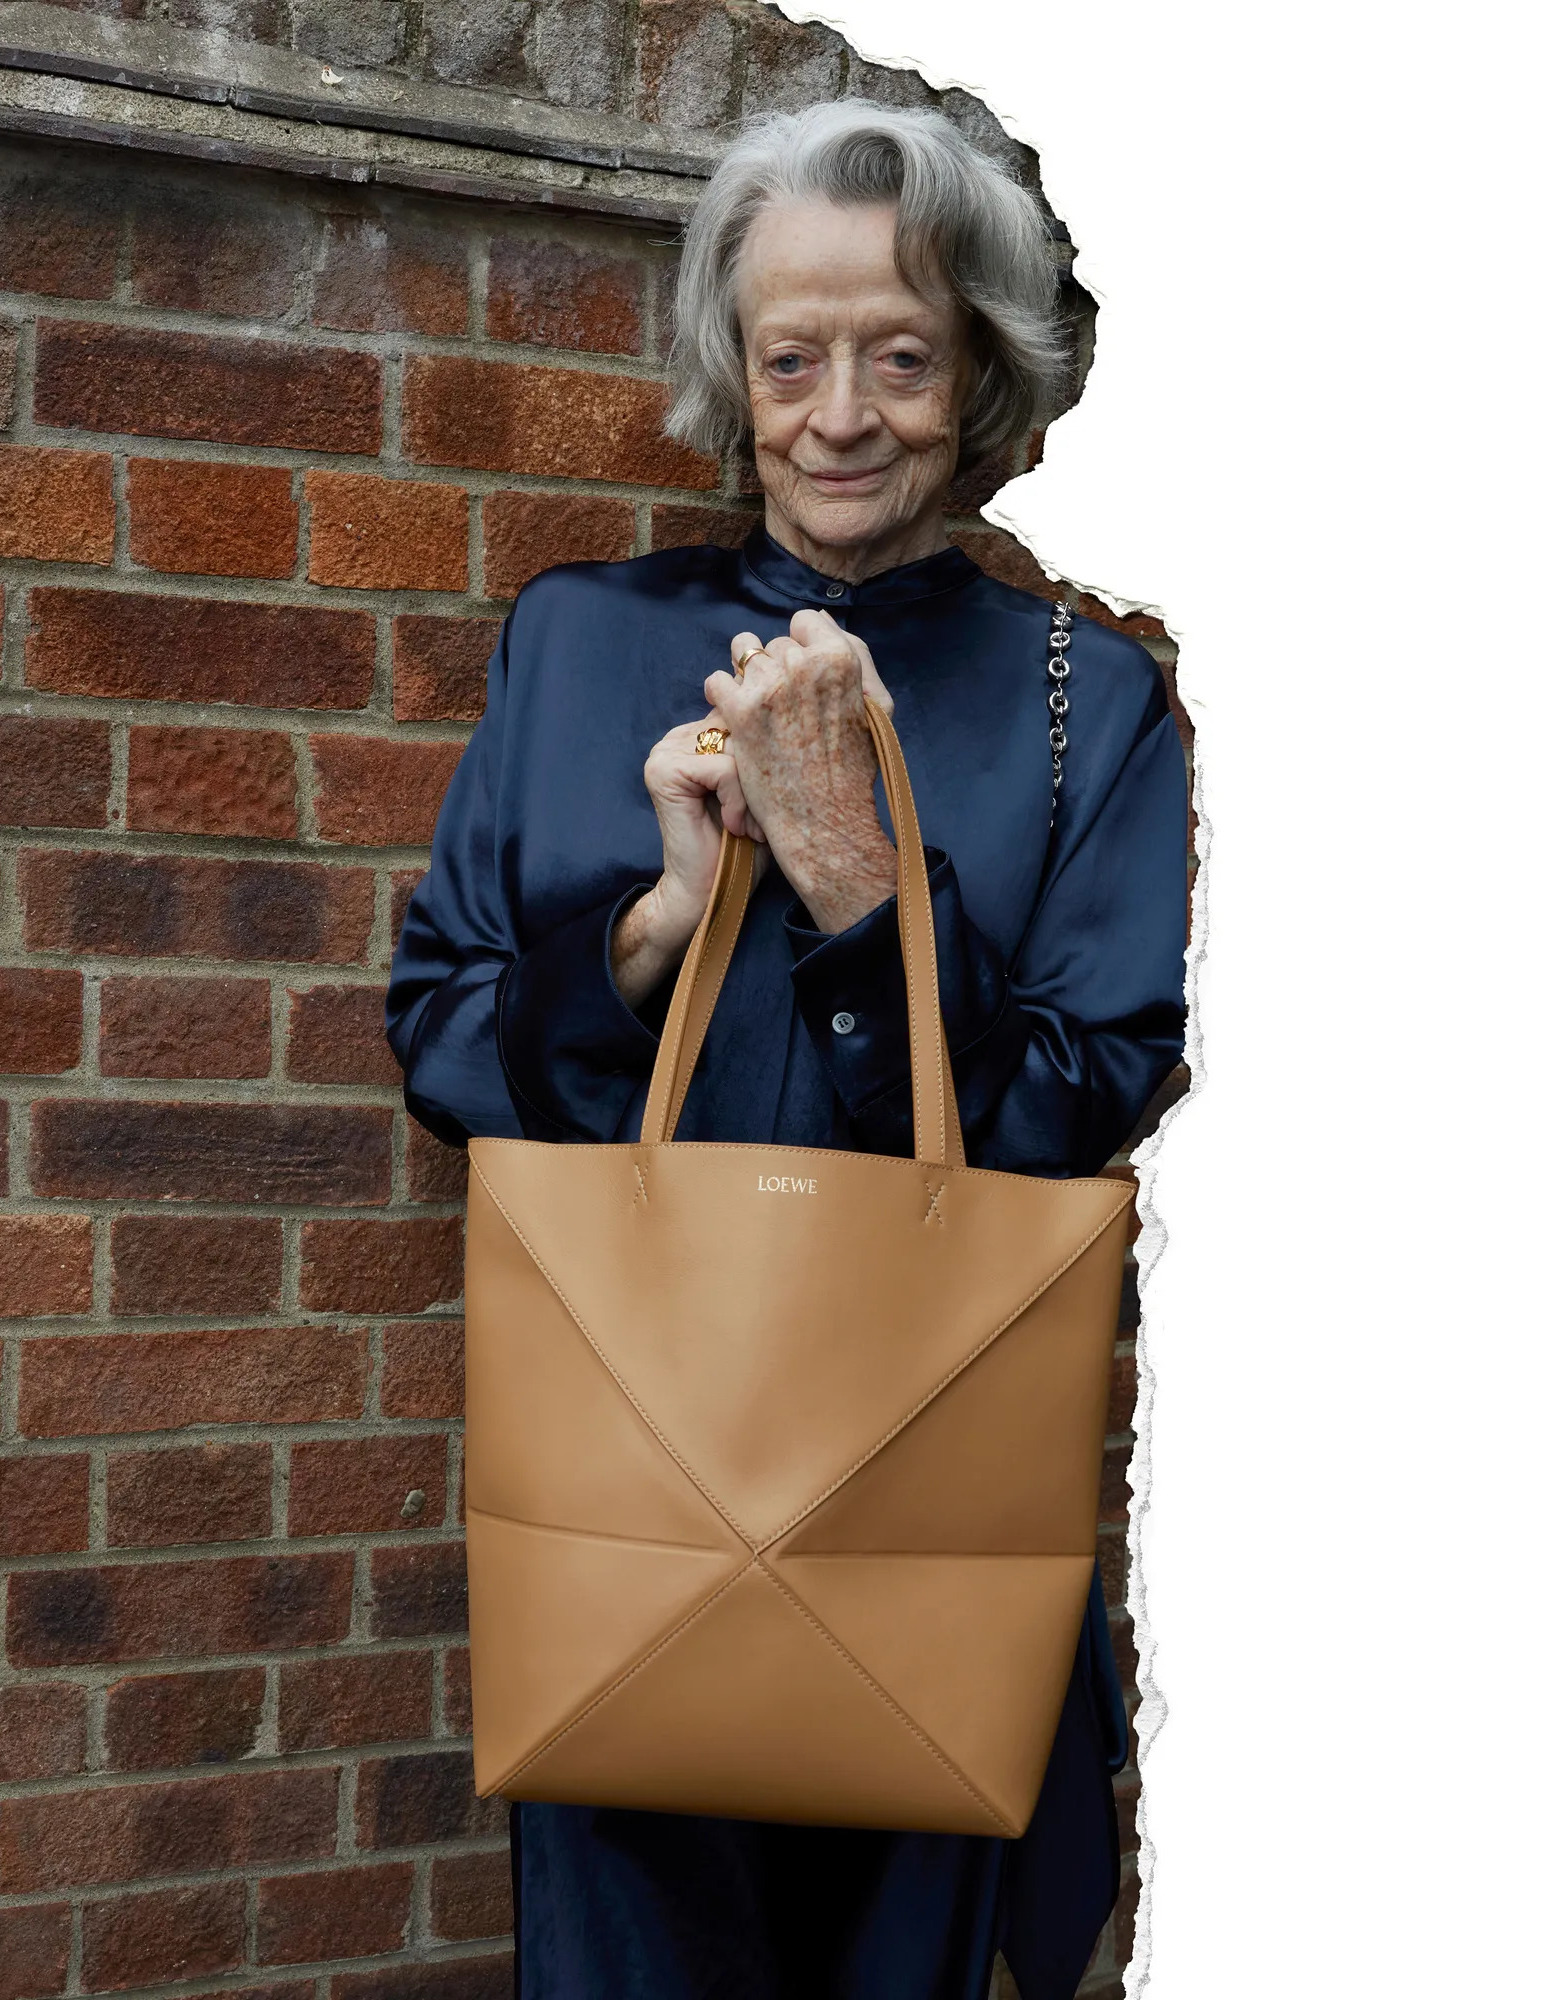 LOEWE SS24 PRECO JT CAMPAIGN MAGGIE SMITH RGB CROPPED 4x5 CUT OUT LOE050723 0976